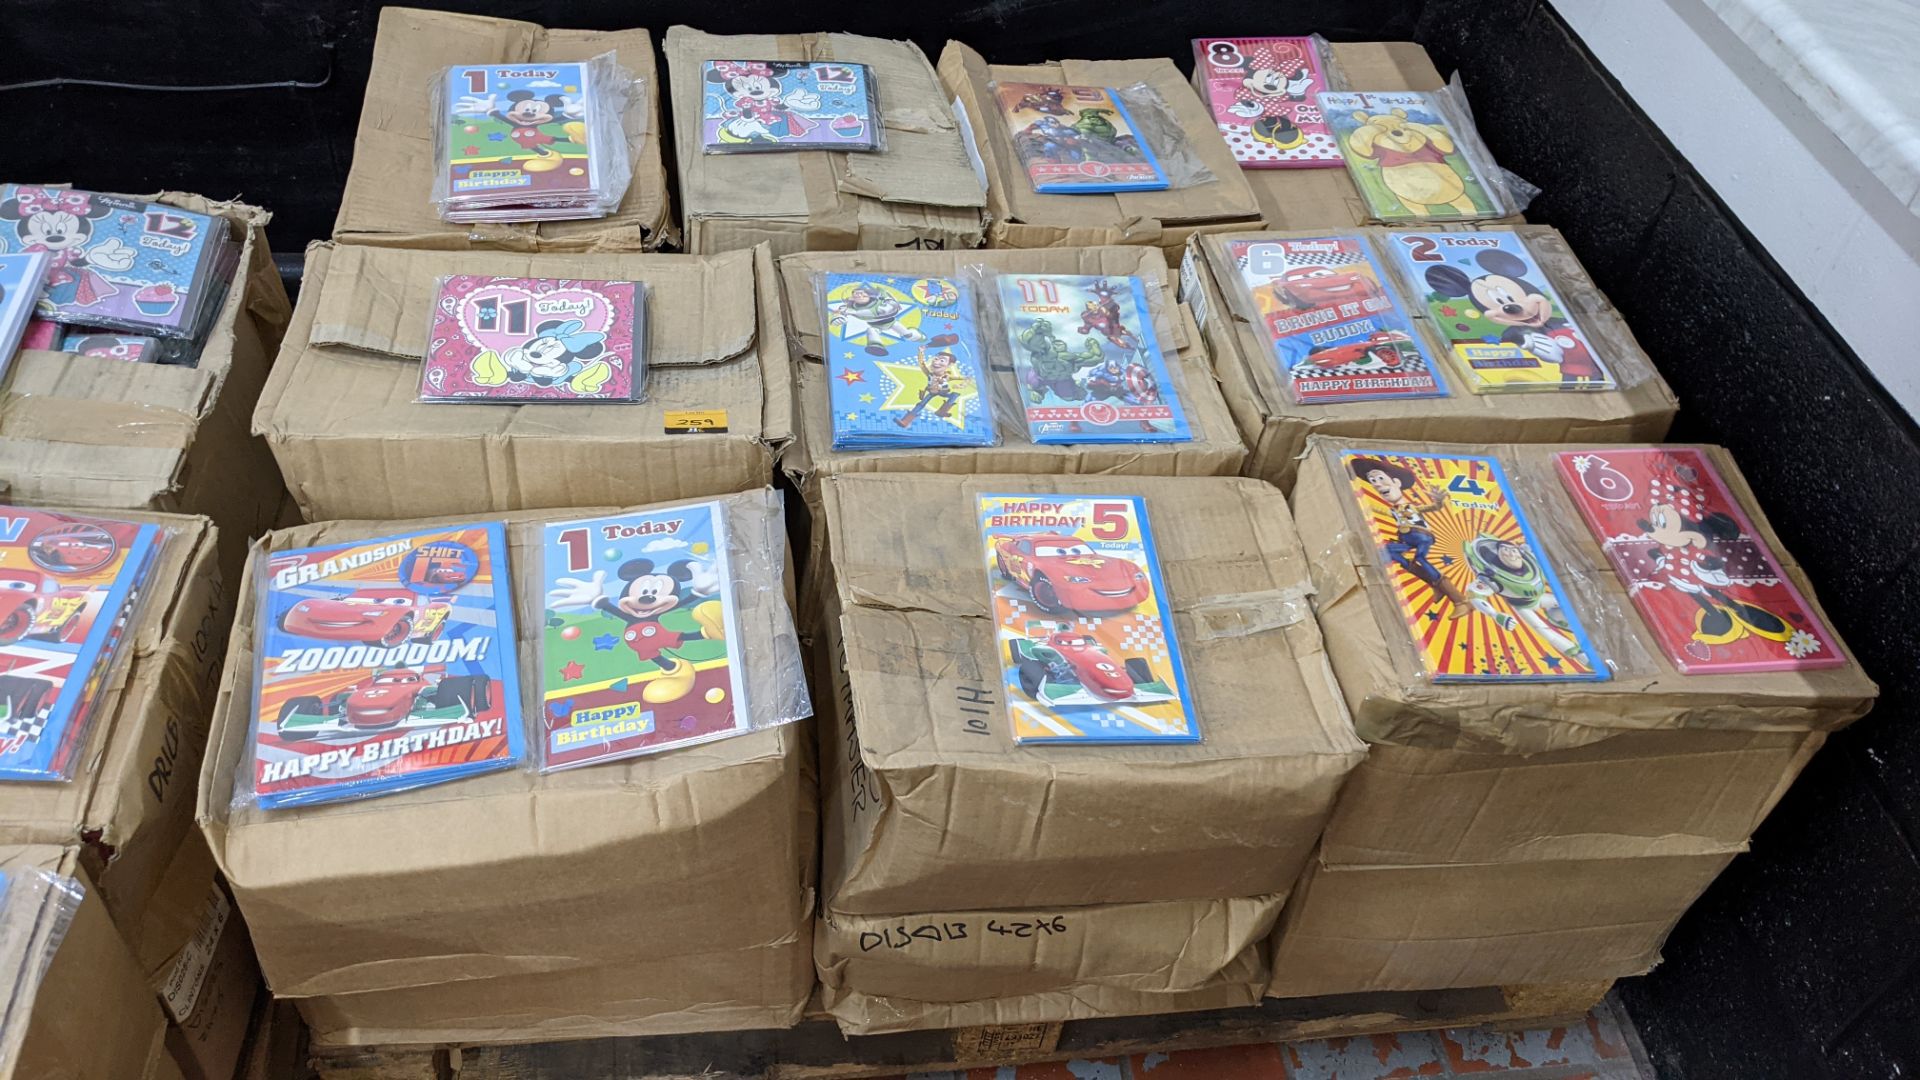 Large quantity of primarily Disney, Marvel/Avengers & other branded greetings cards. All of the car